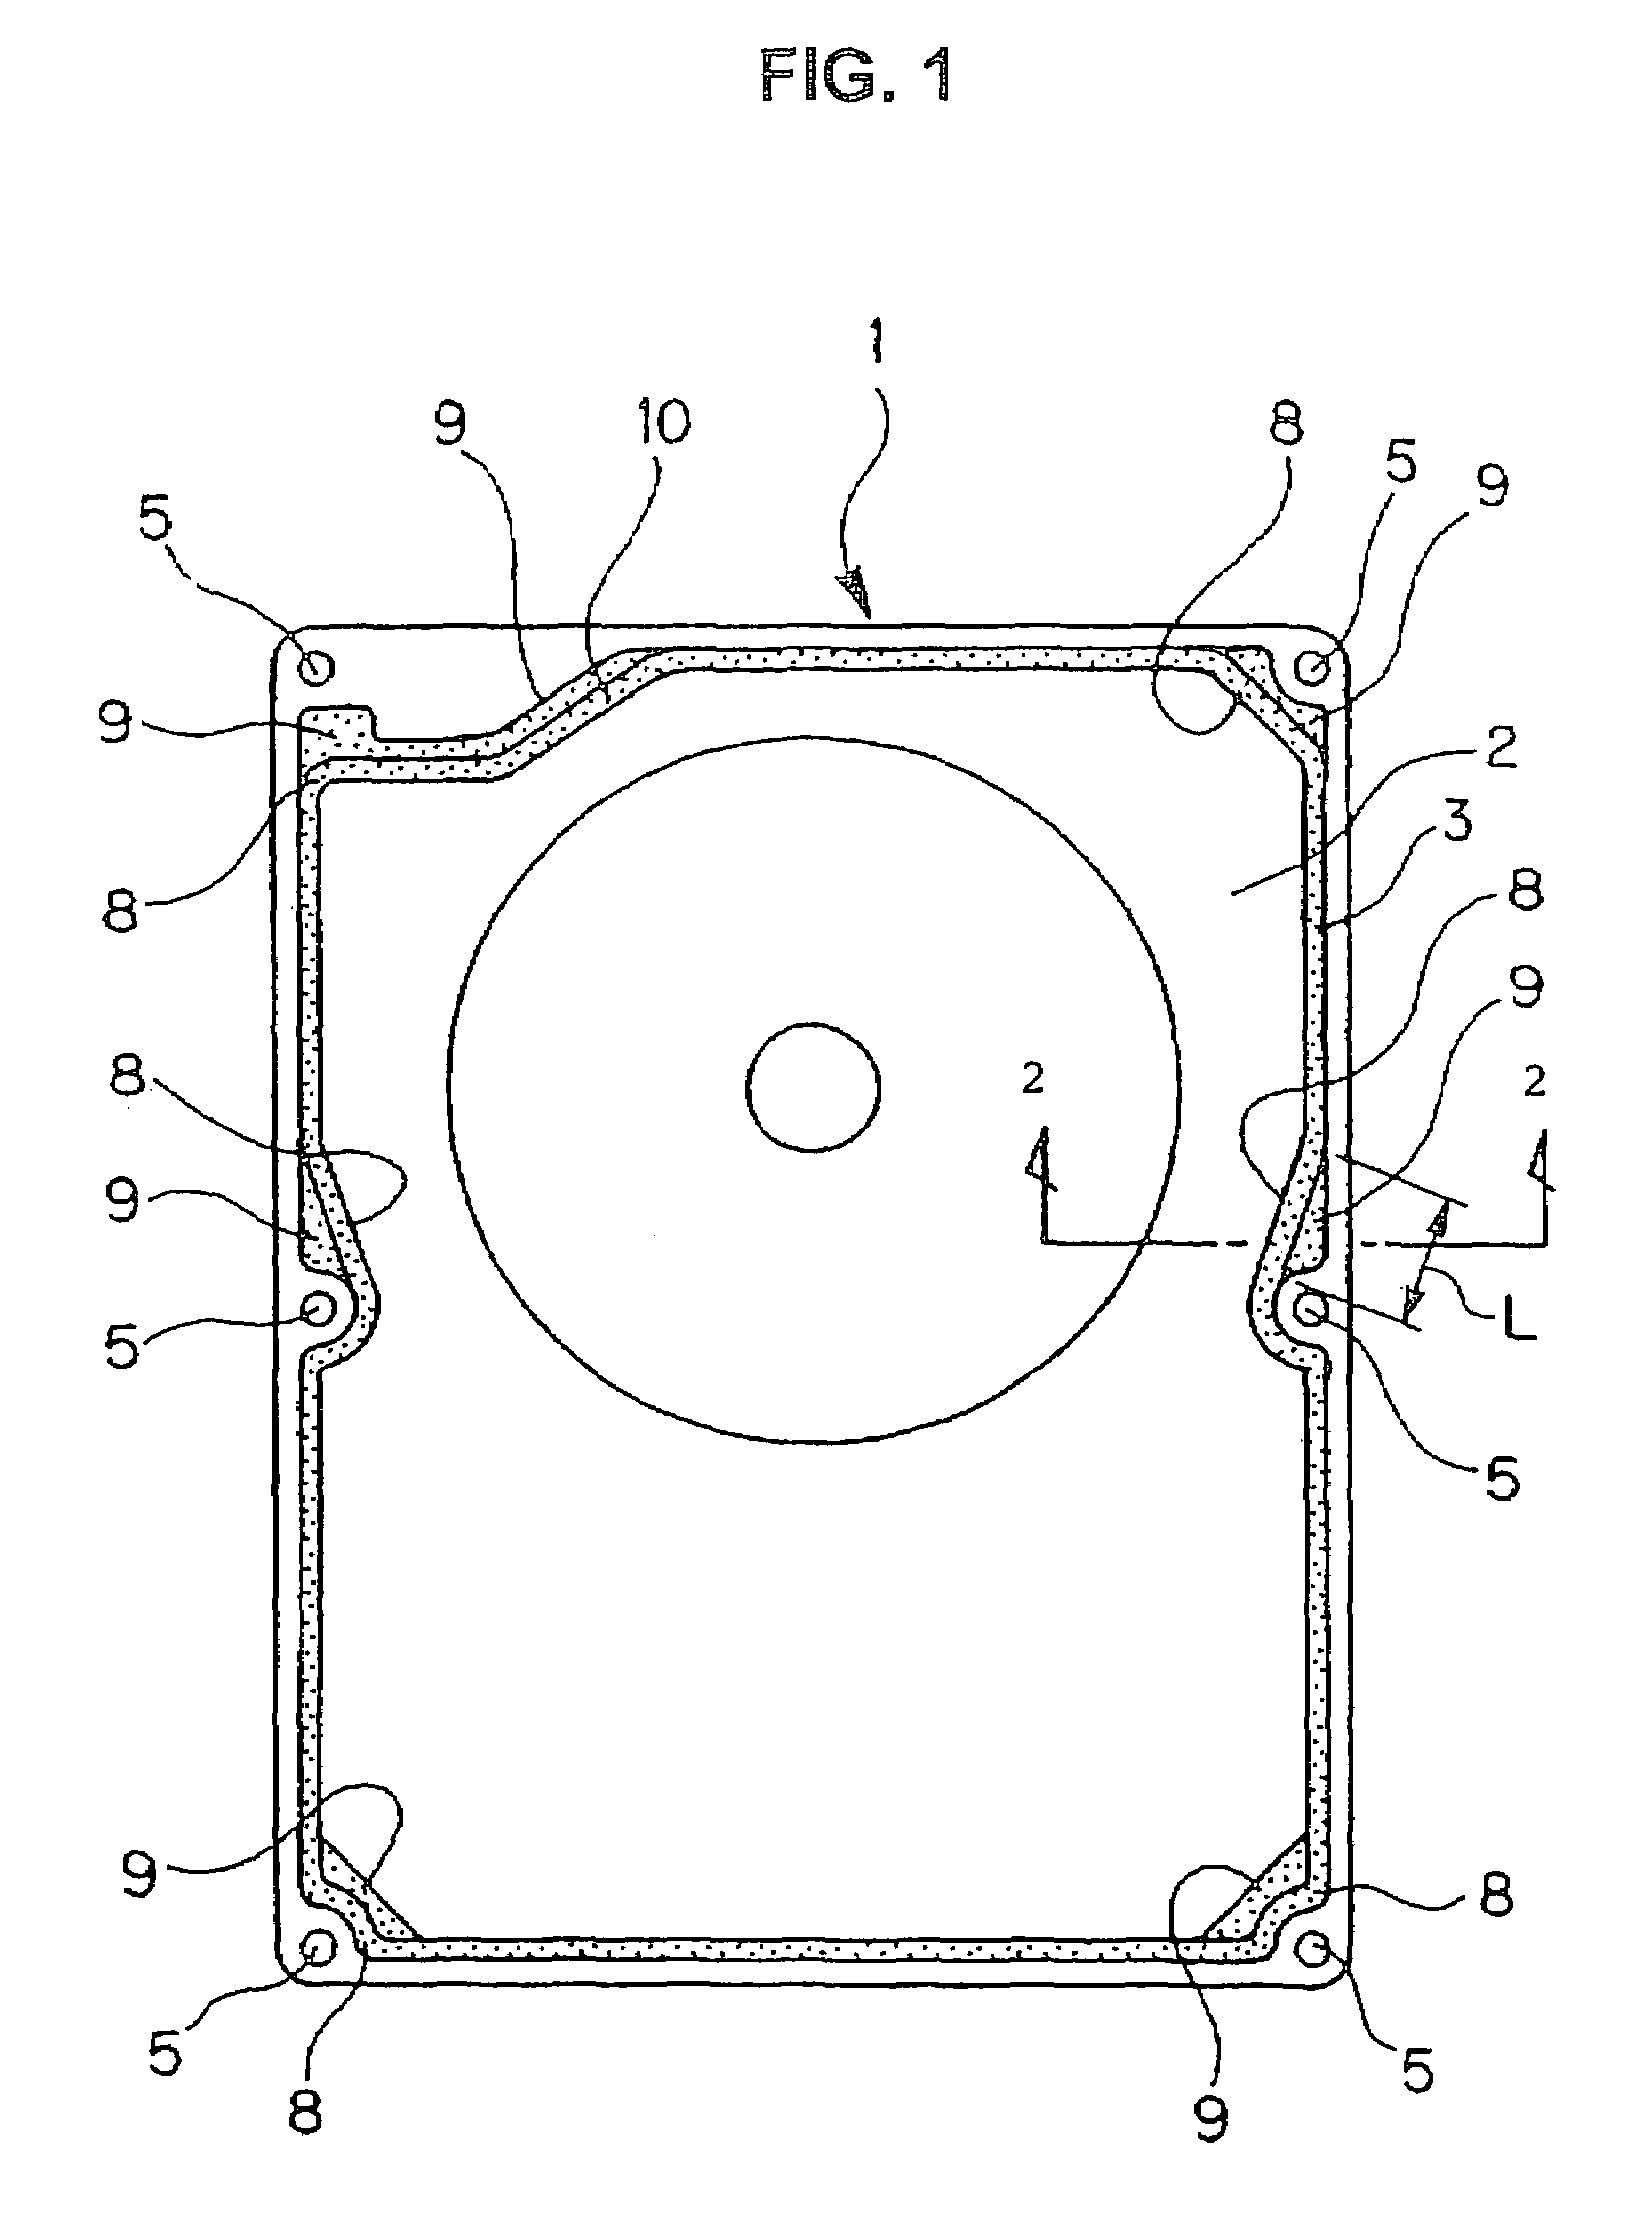 Gasket for hard disc drive having compressible lip and extension portion at screw fixing/inflection portions